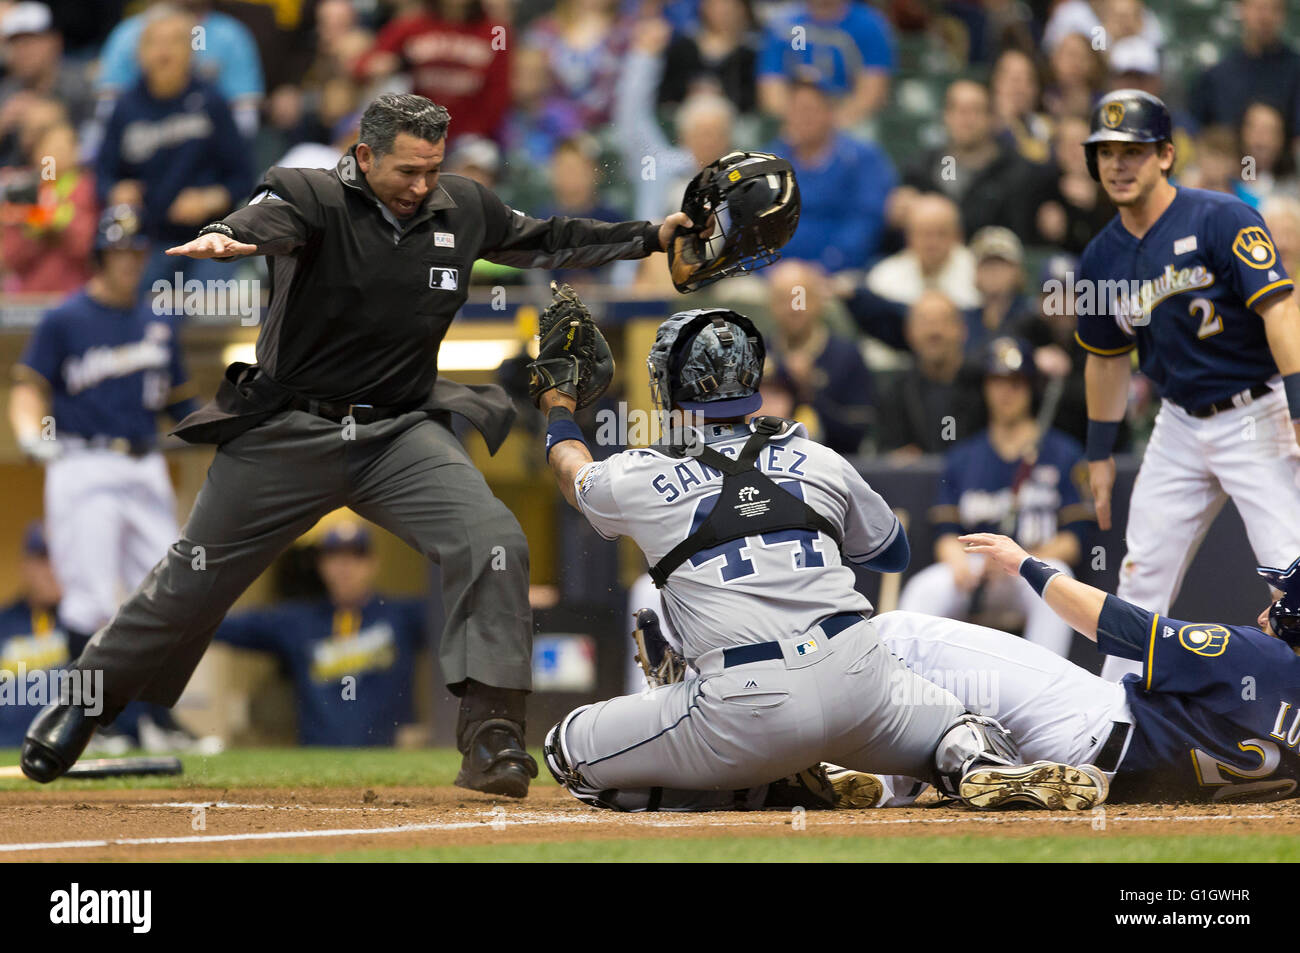 Milwaukee, WI, USA. 14th May, 2016. Home plate umpire Manny Gonzalez calls Milwaukee Brewers runner Jonathan Lucroy #20 safe as San Diego Padres catcher Hector Sanchez #44 shows the tag in the Major League Baseball game between the Milwaukee Brewers and the San Diego Padres at Miller Park in Milwaukee, WI. John Fisher/CSM/Alamy Live News Stock Photo